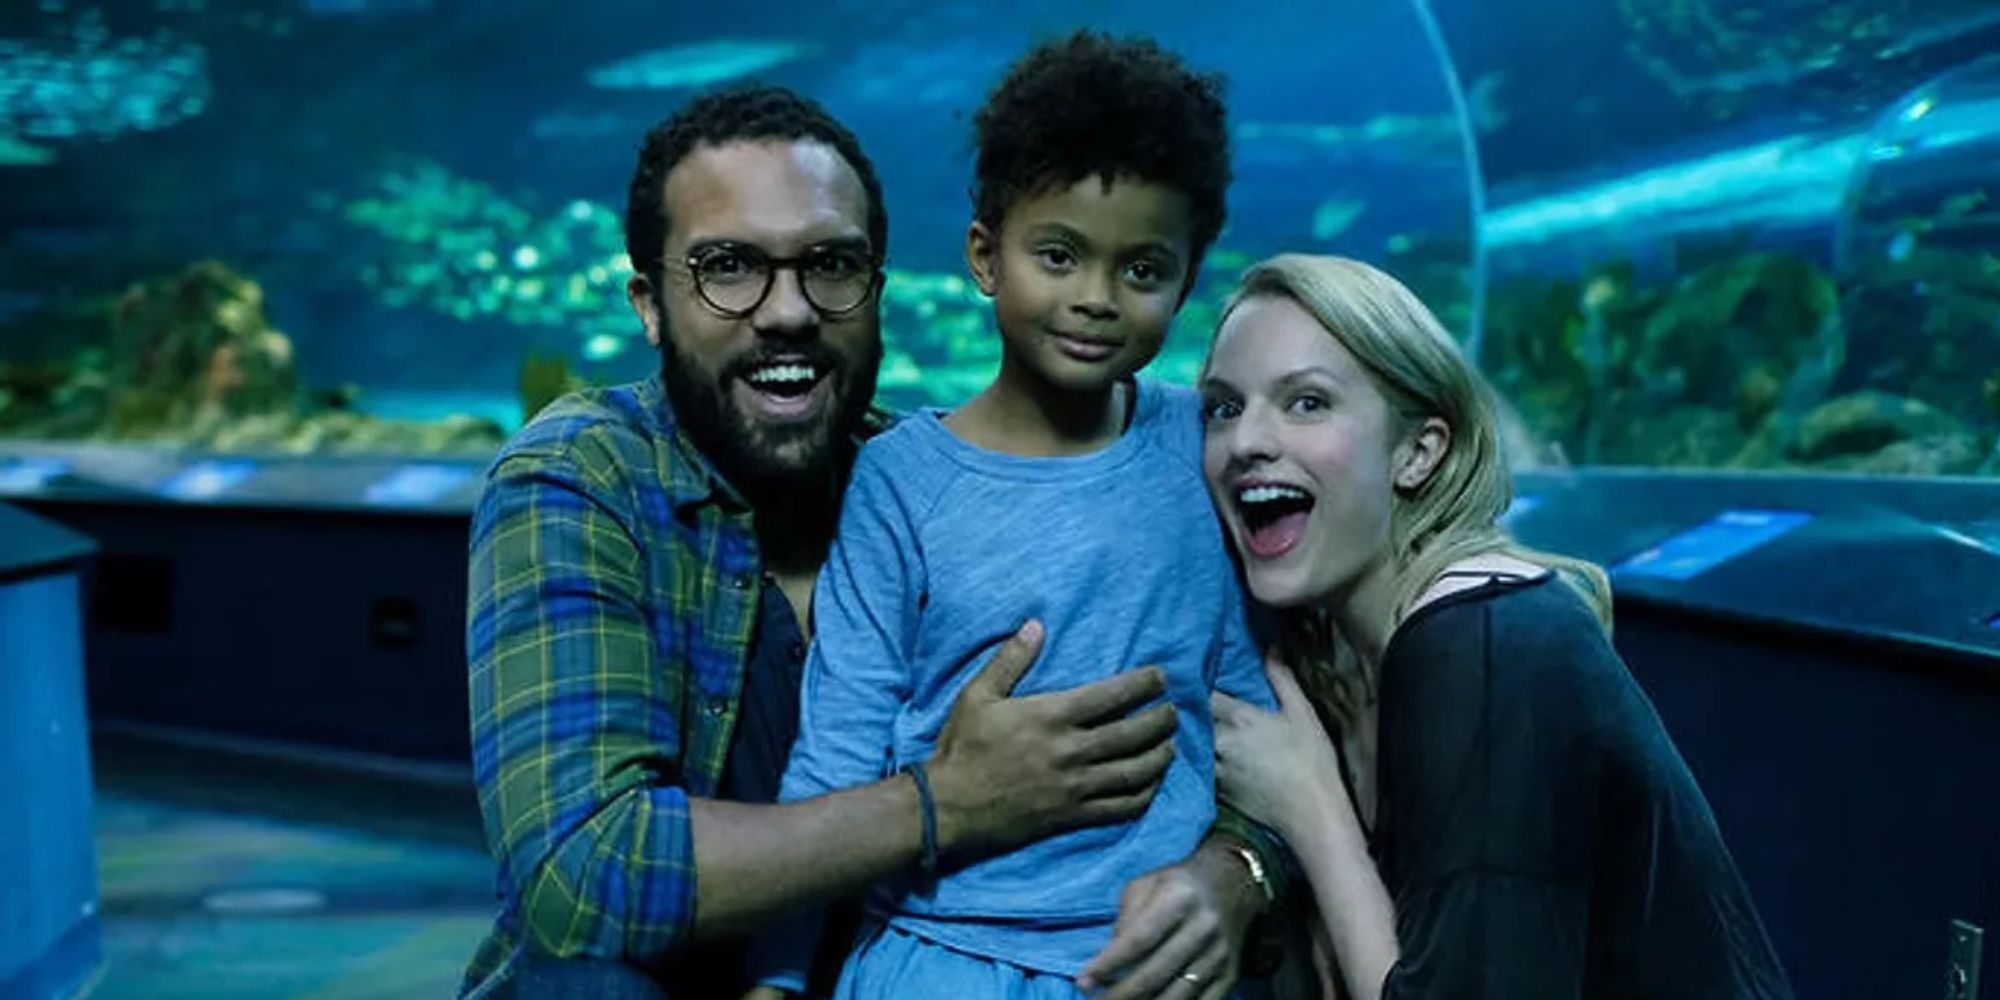 Luke, Hannah, and June laughing and smiling at the aquarium in The Handmaid's Tale